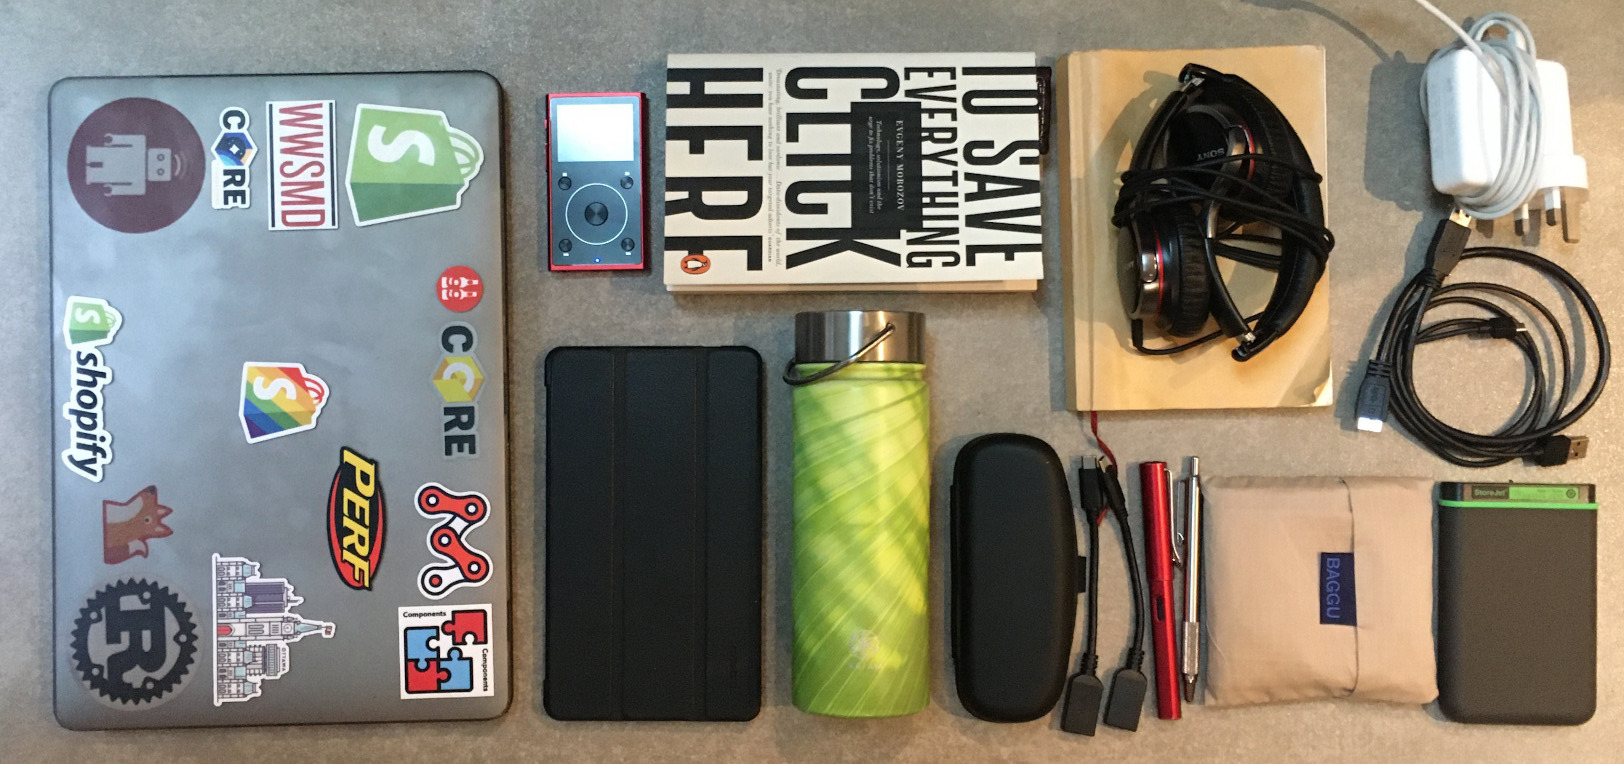 The contents of my backpack when working away from home